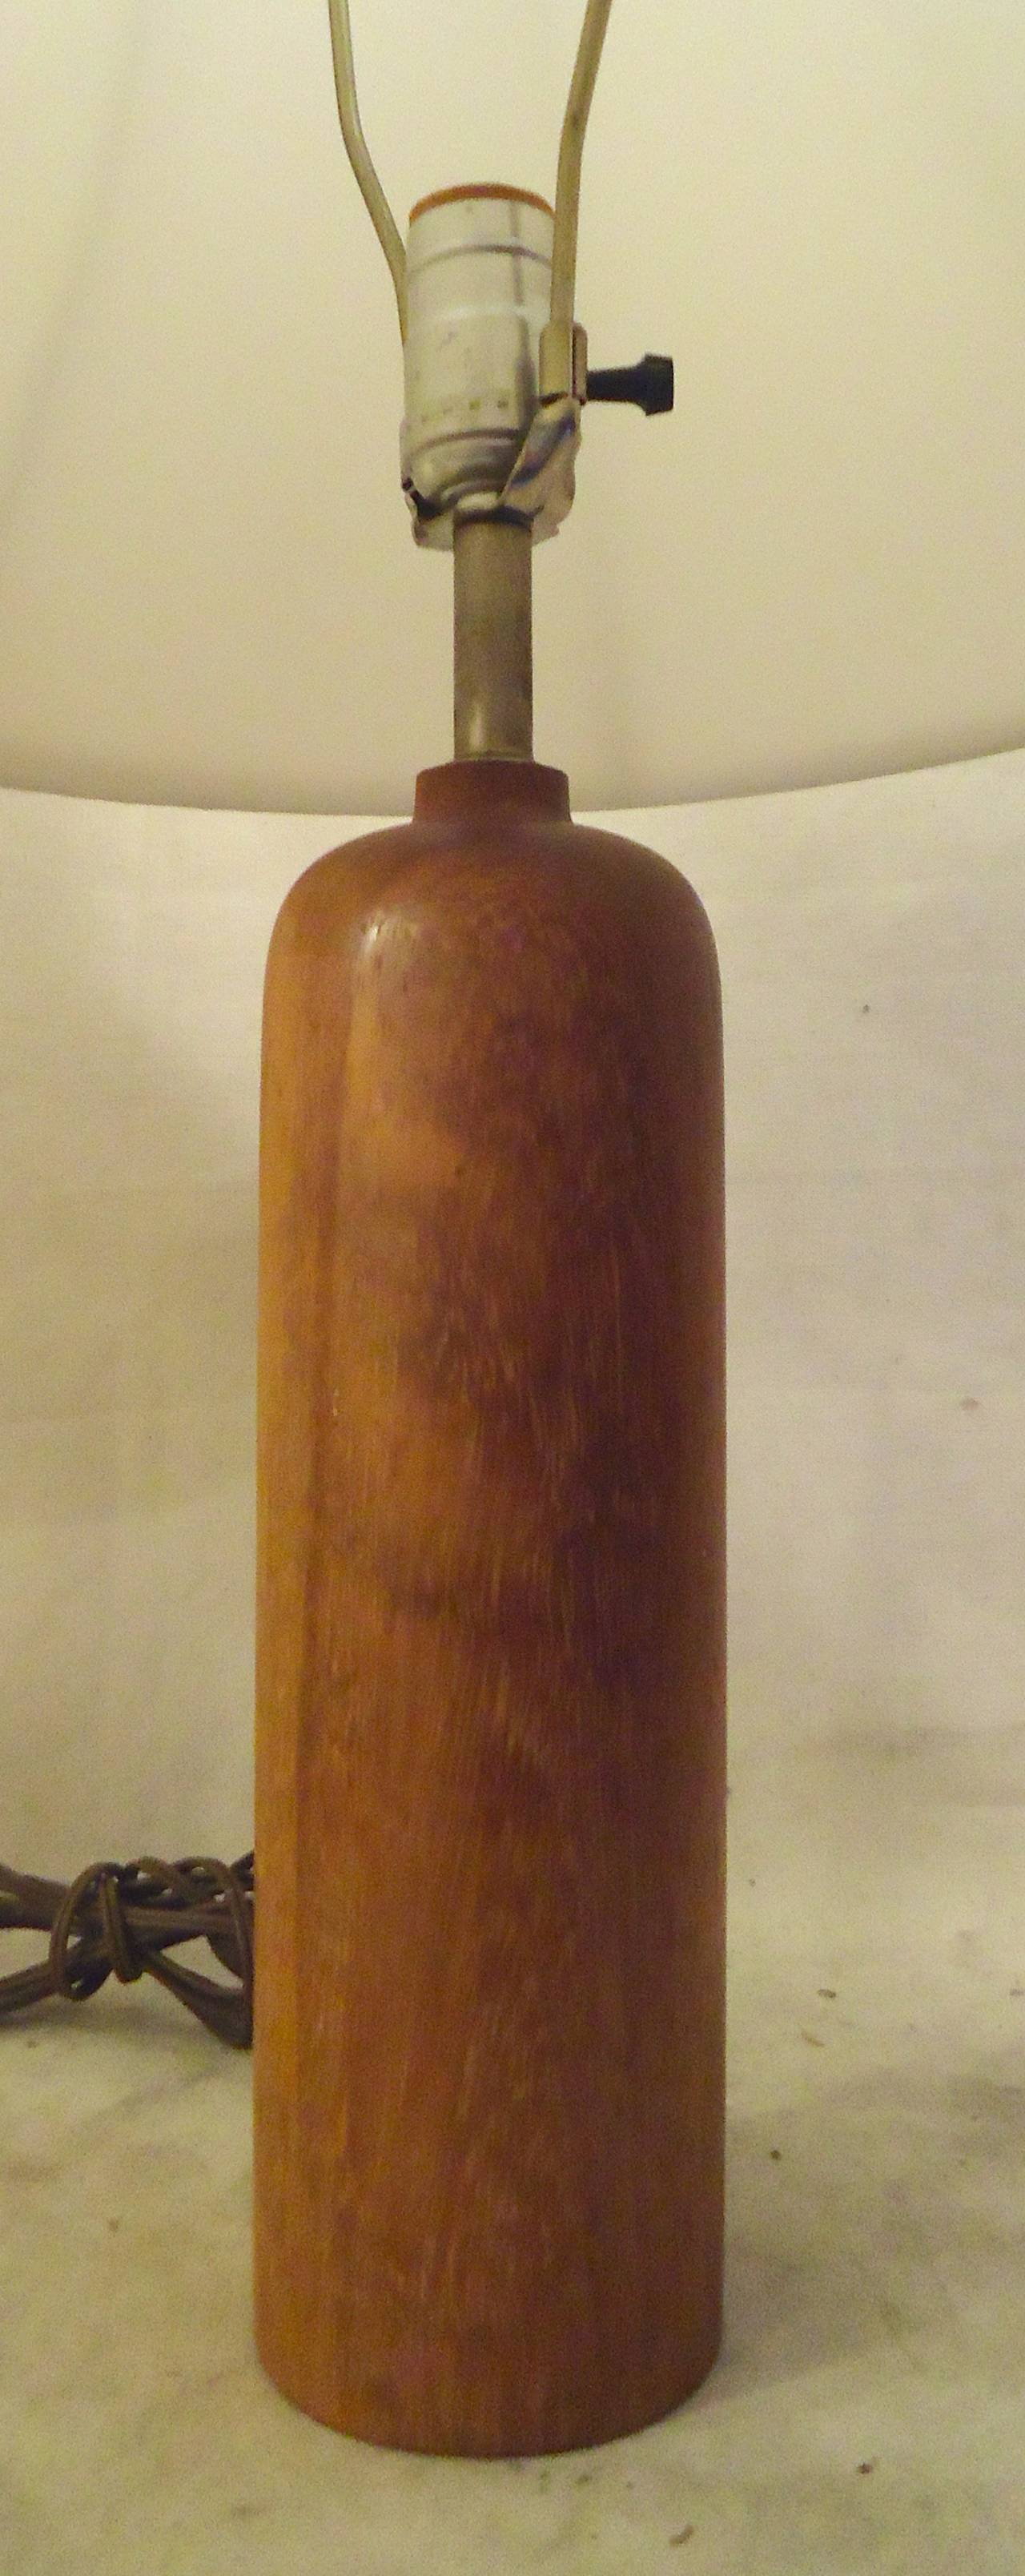 Sculpted teak wood table lamps with shades. They have a simple and sleek design.

(Please confirm item location - NY or NJ - with dealer)